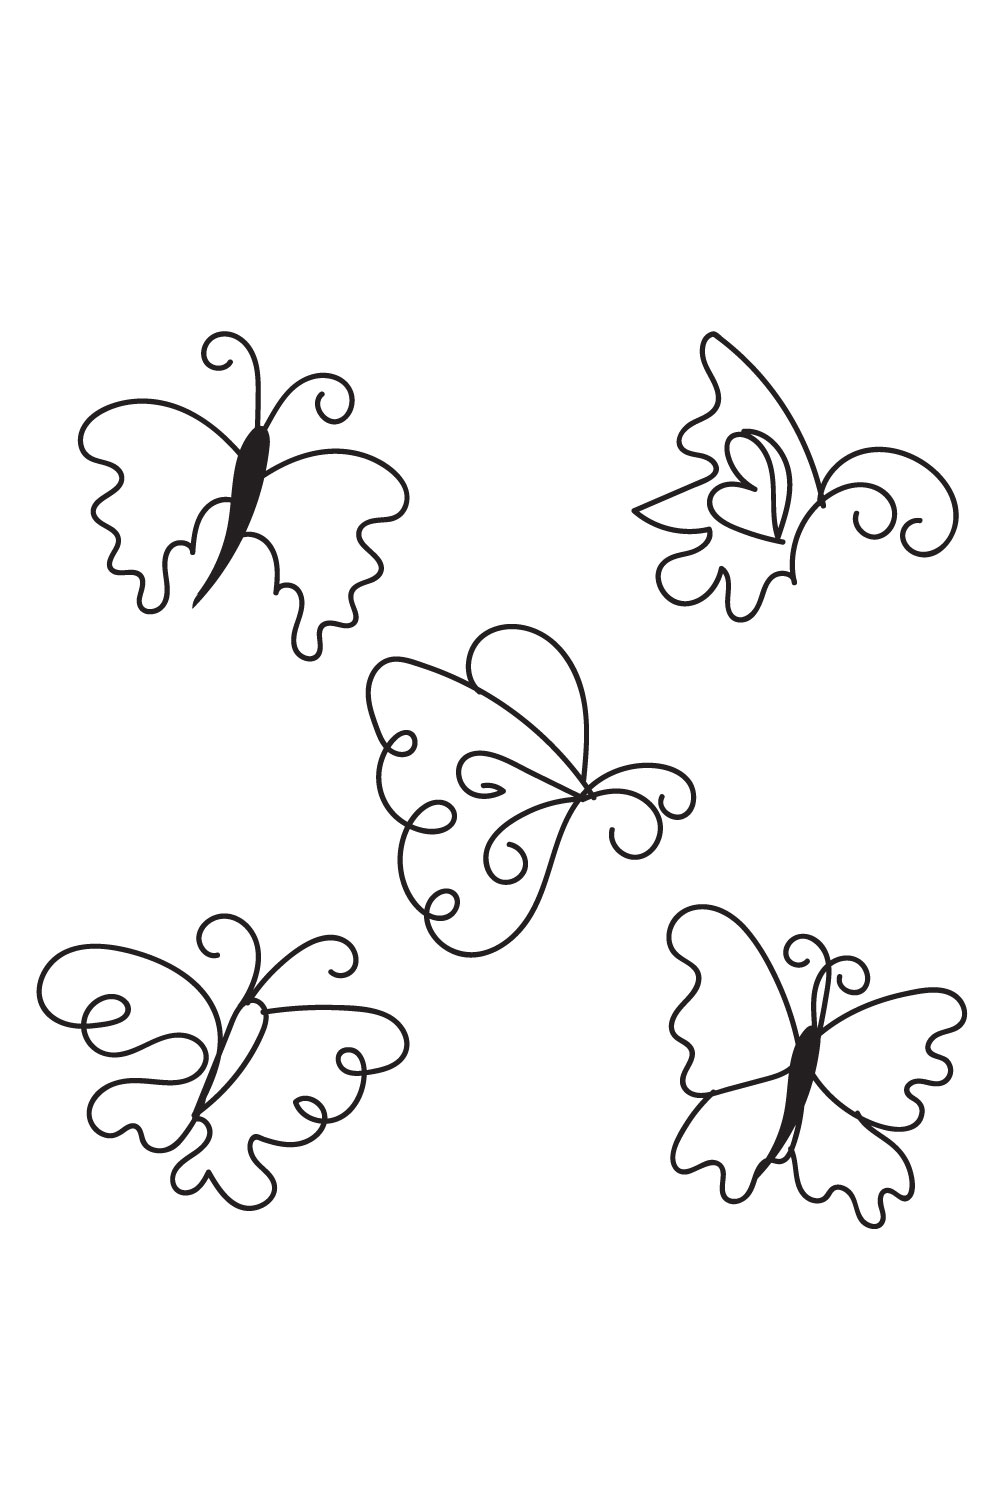 Four butterflies flying in the air with a white background.